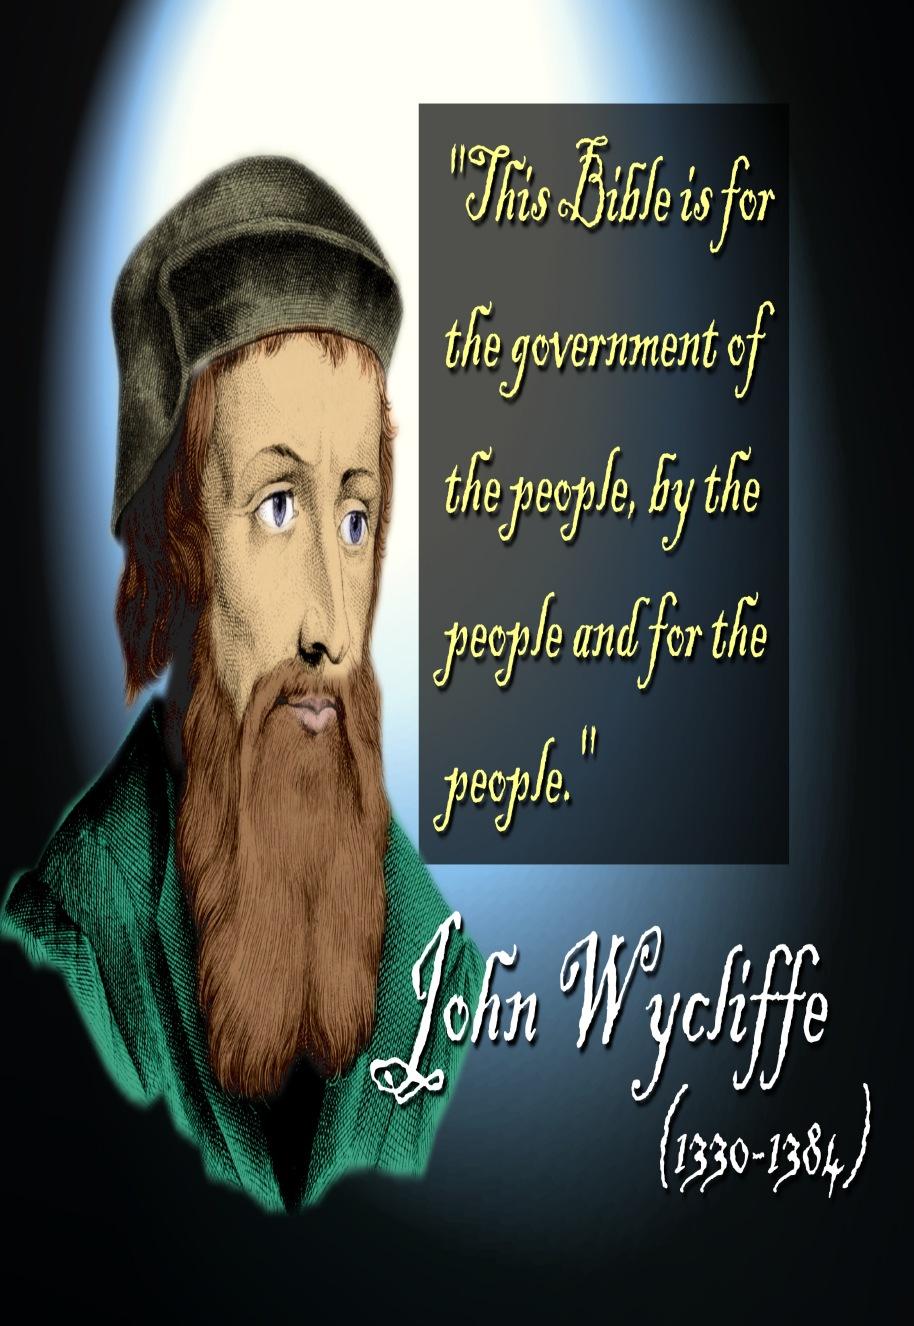 Pre-Reformation John Wycliffe The Morning Star of the Reformation (1320-1384) "It is plain to me that our prelates in granting indulgences do commonly blaspheme the wisdom of God.